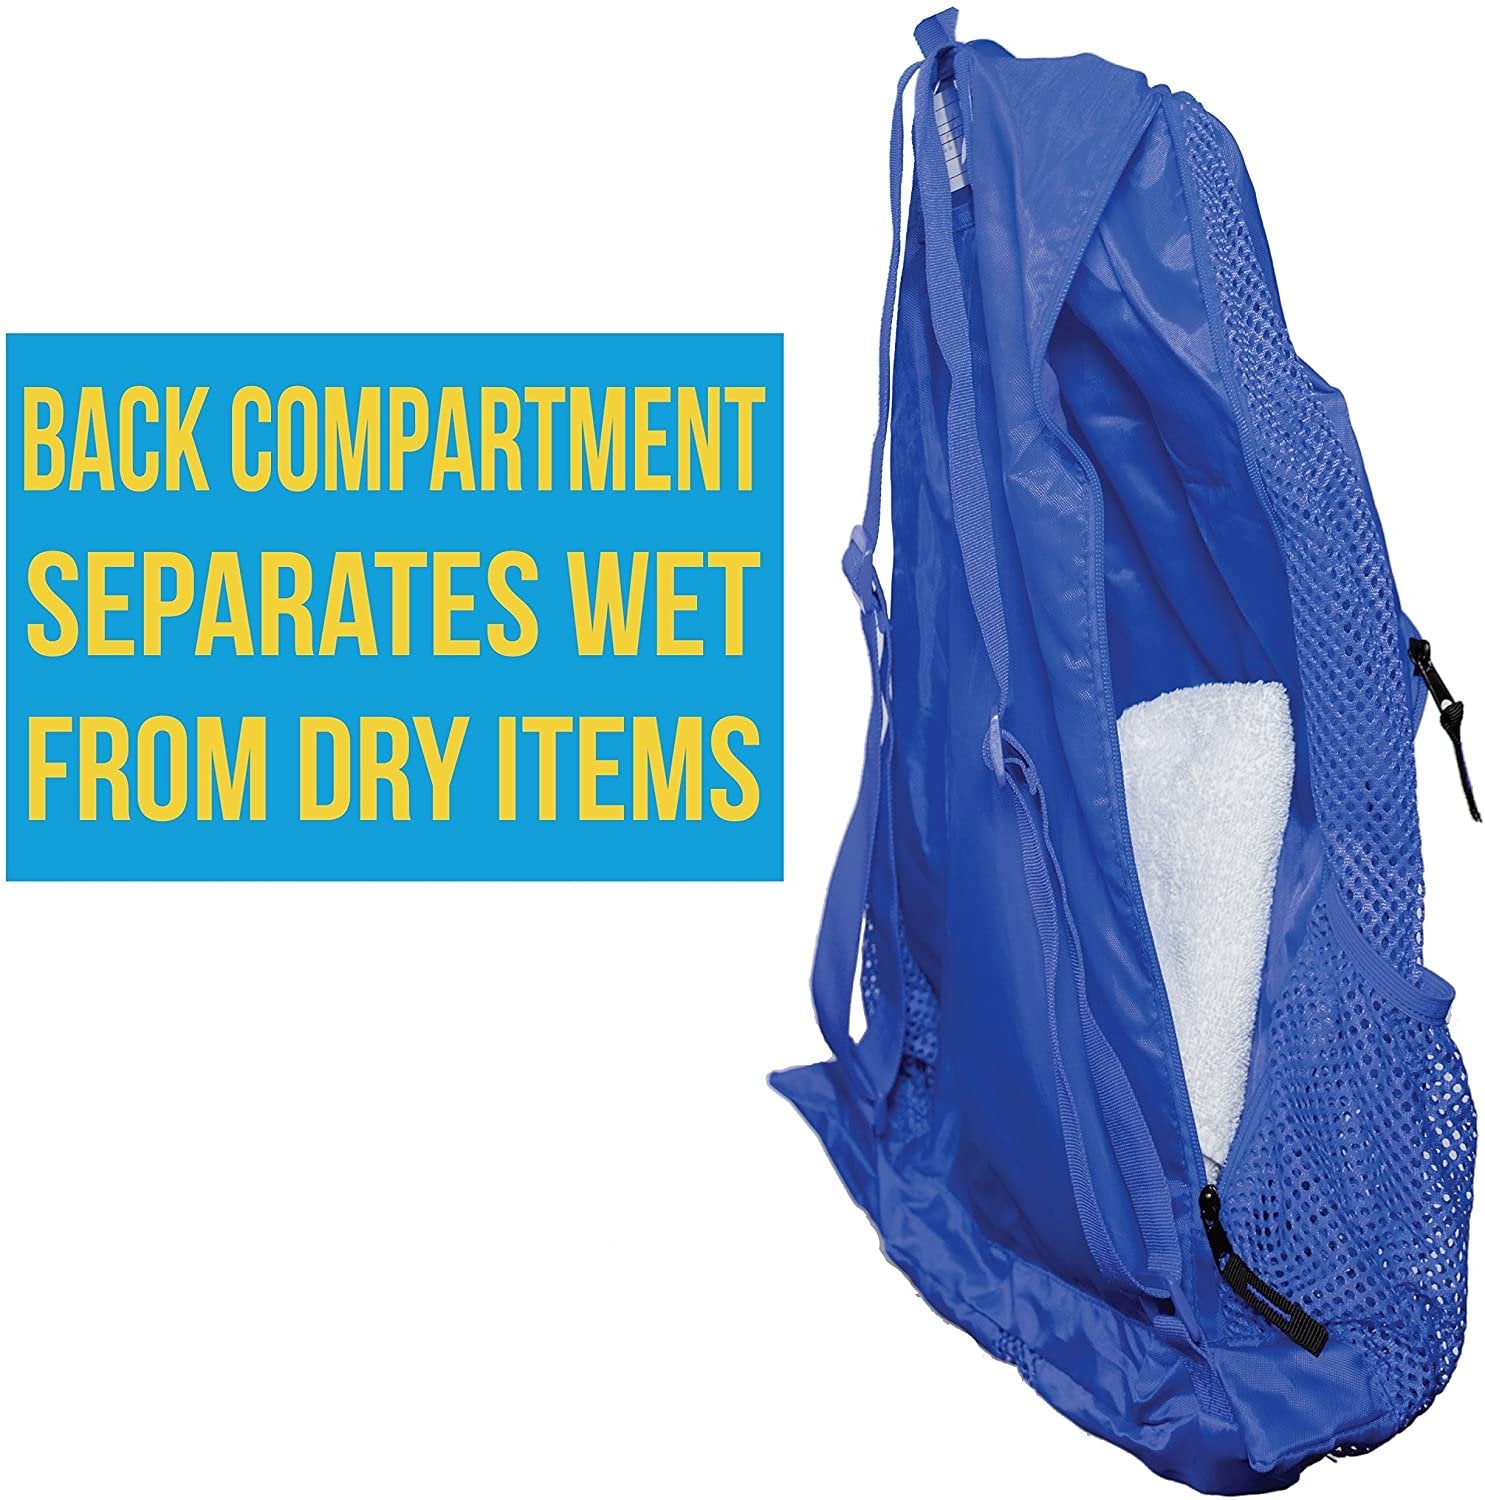 Athletico Mesh Swim Bag - Mesh Pool Bag With Wet & Dry Compartments for Swimming, the Beach, Camping and More